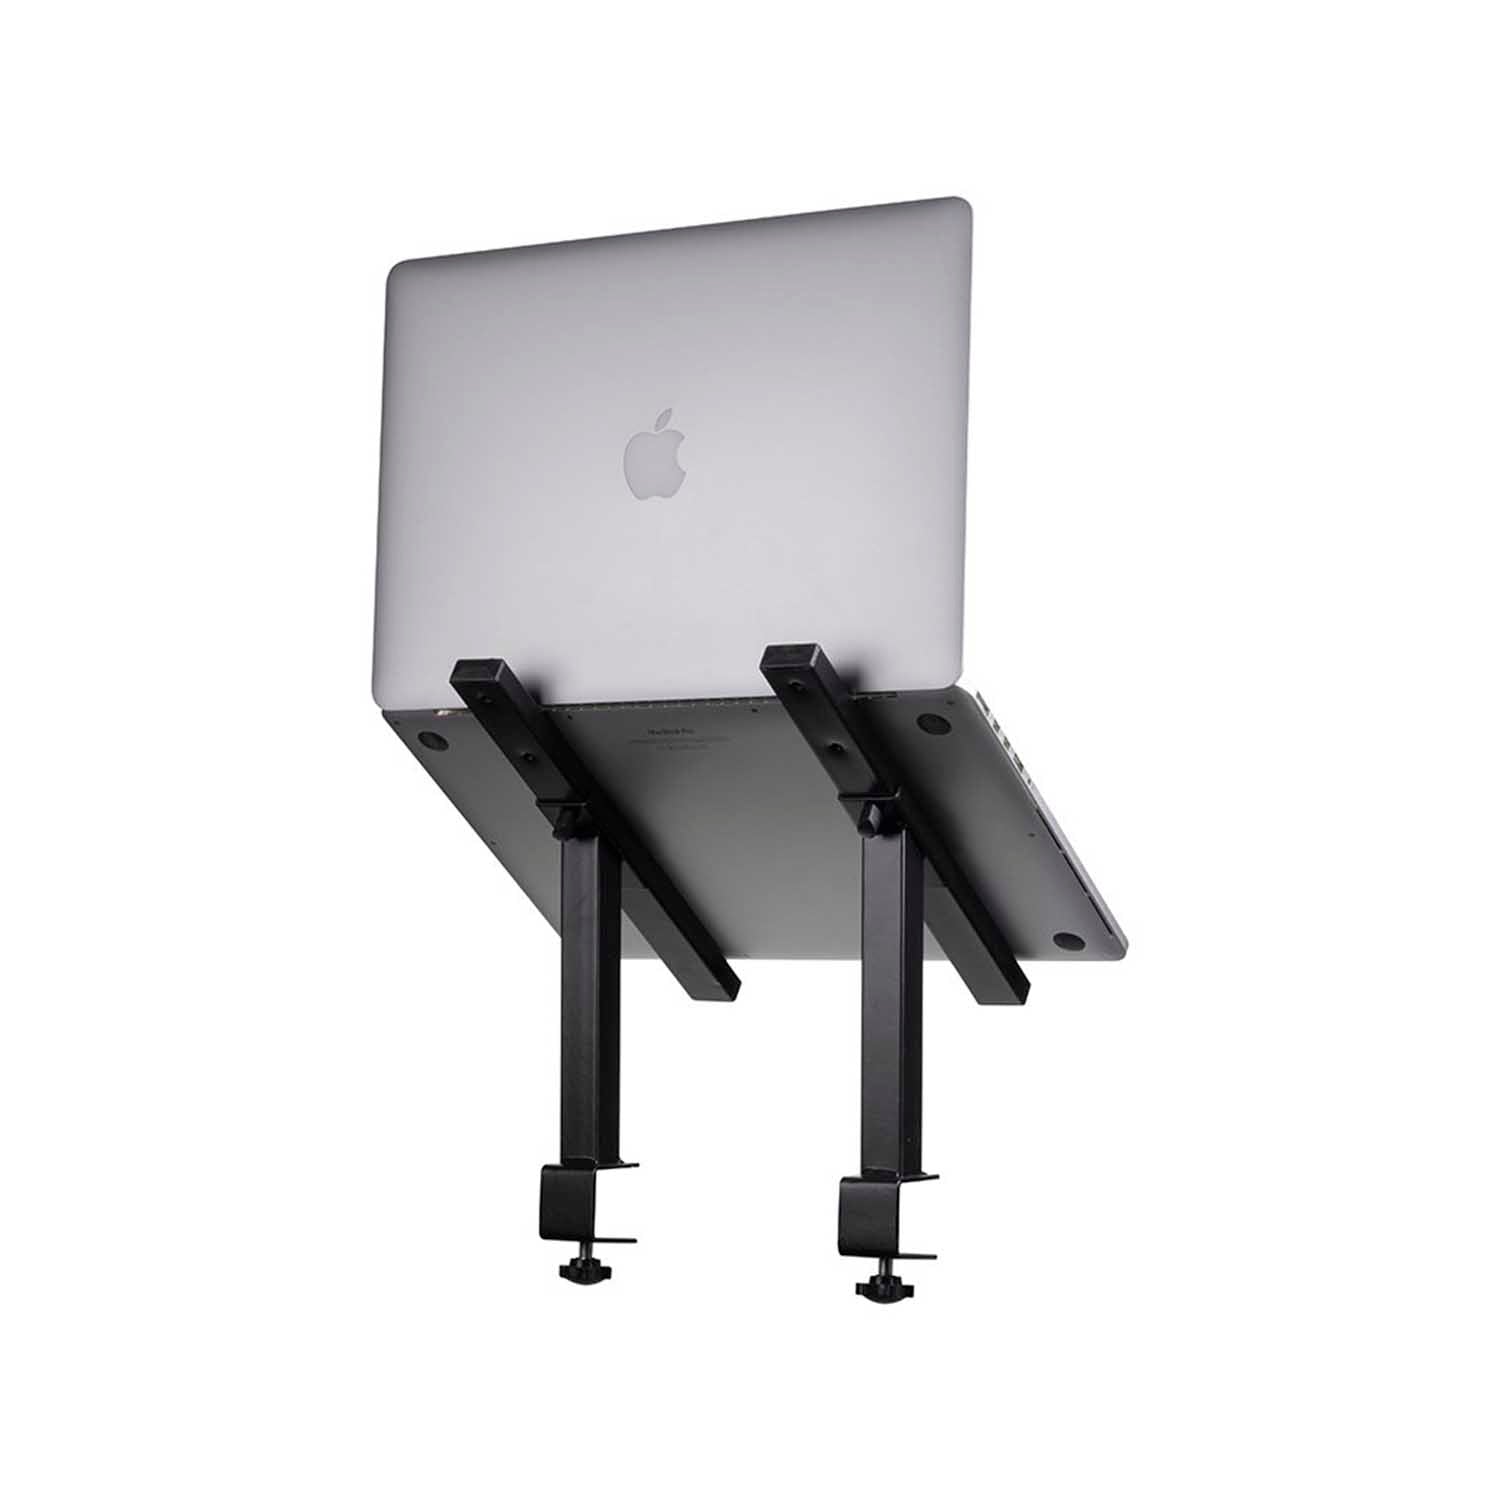 B-Stock: Headliner HL20002 La Brea Laptop Stand Brackets, Pair of Mounting Brackets with Table Clamps - Hollywood DJ